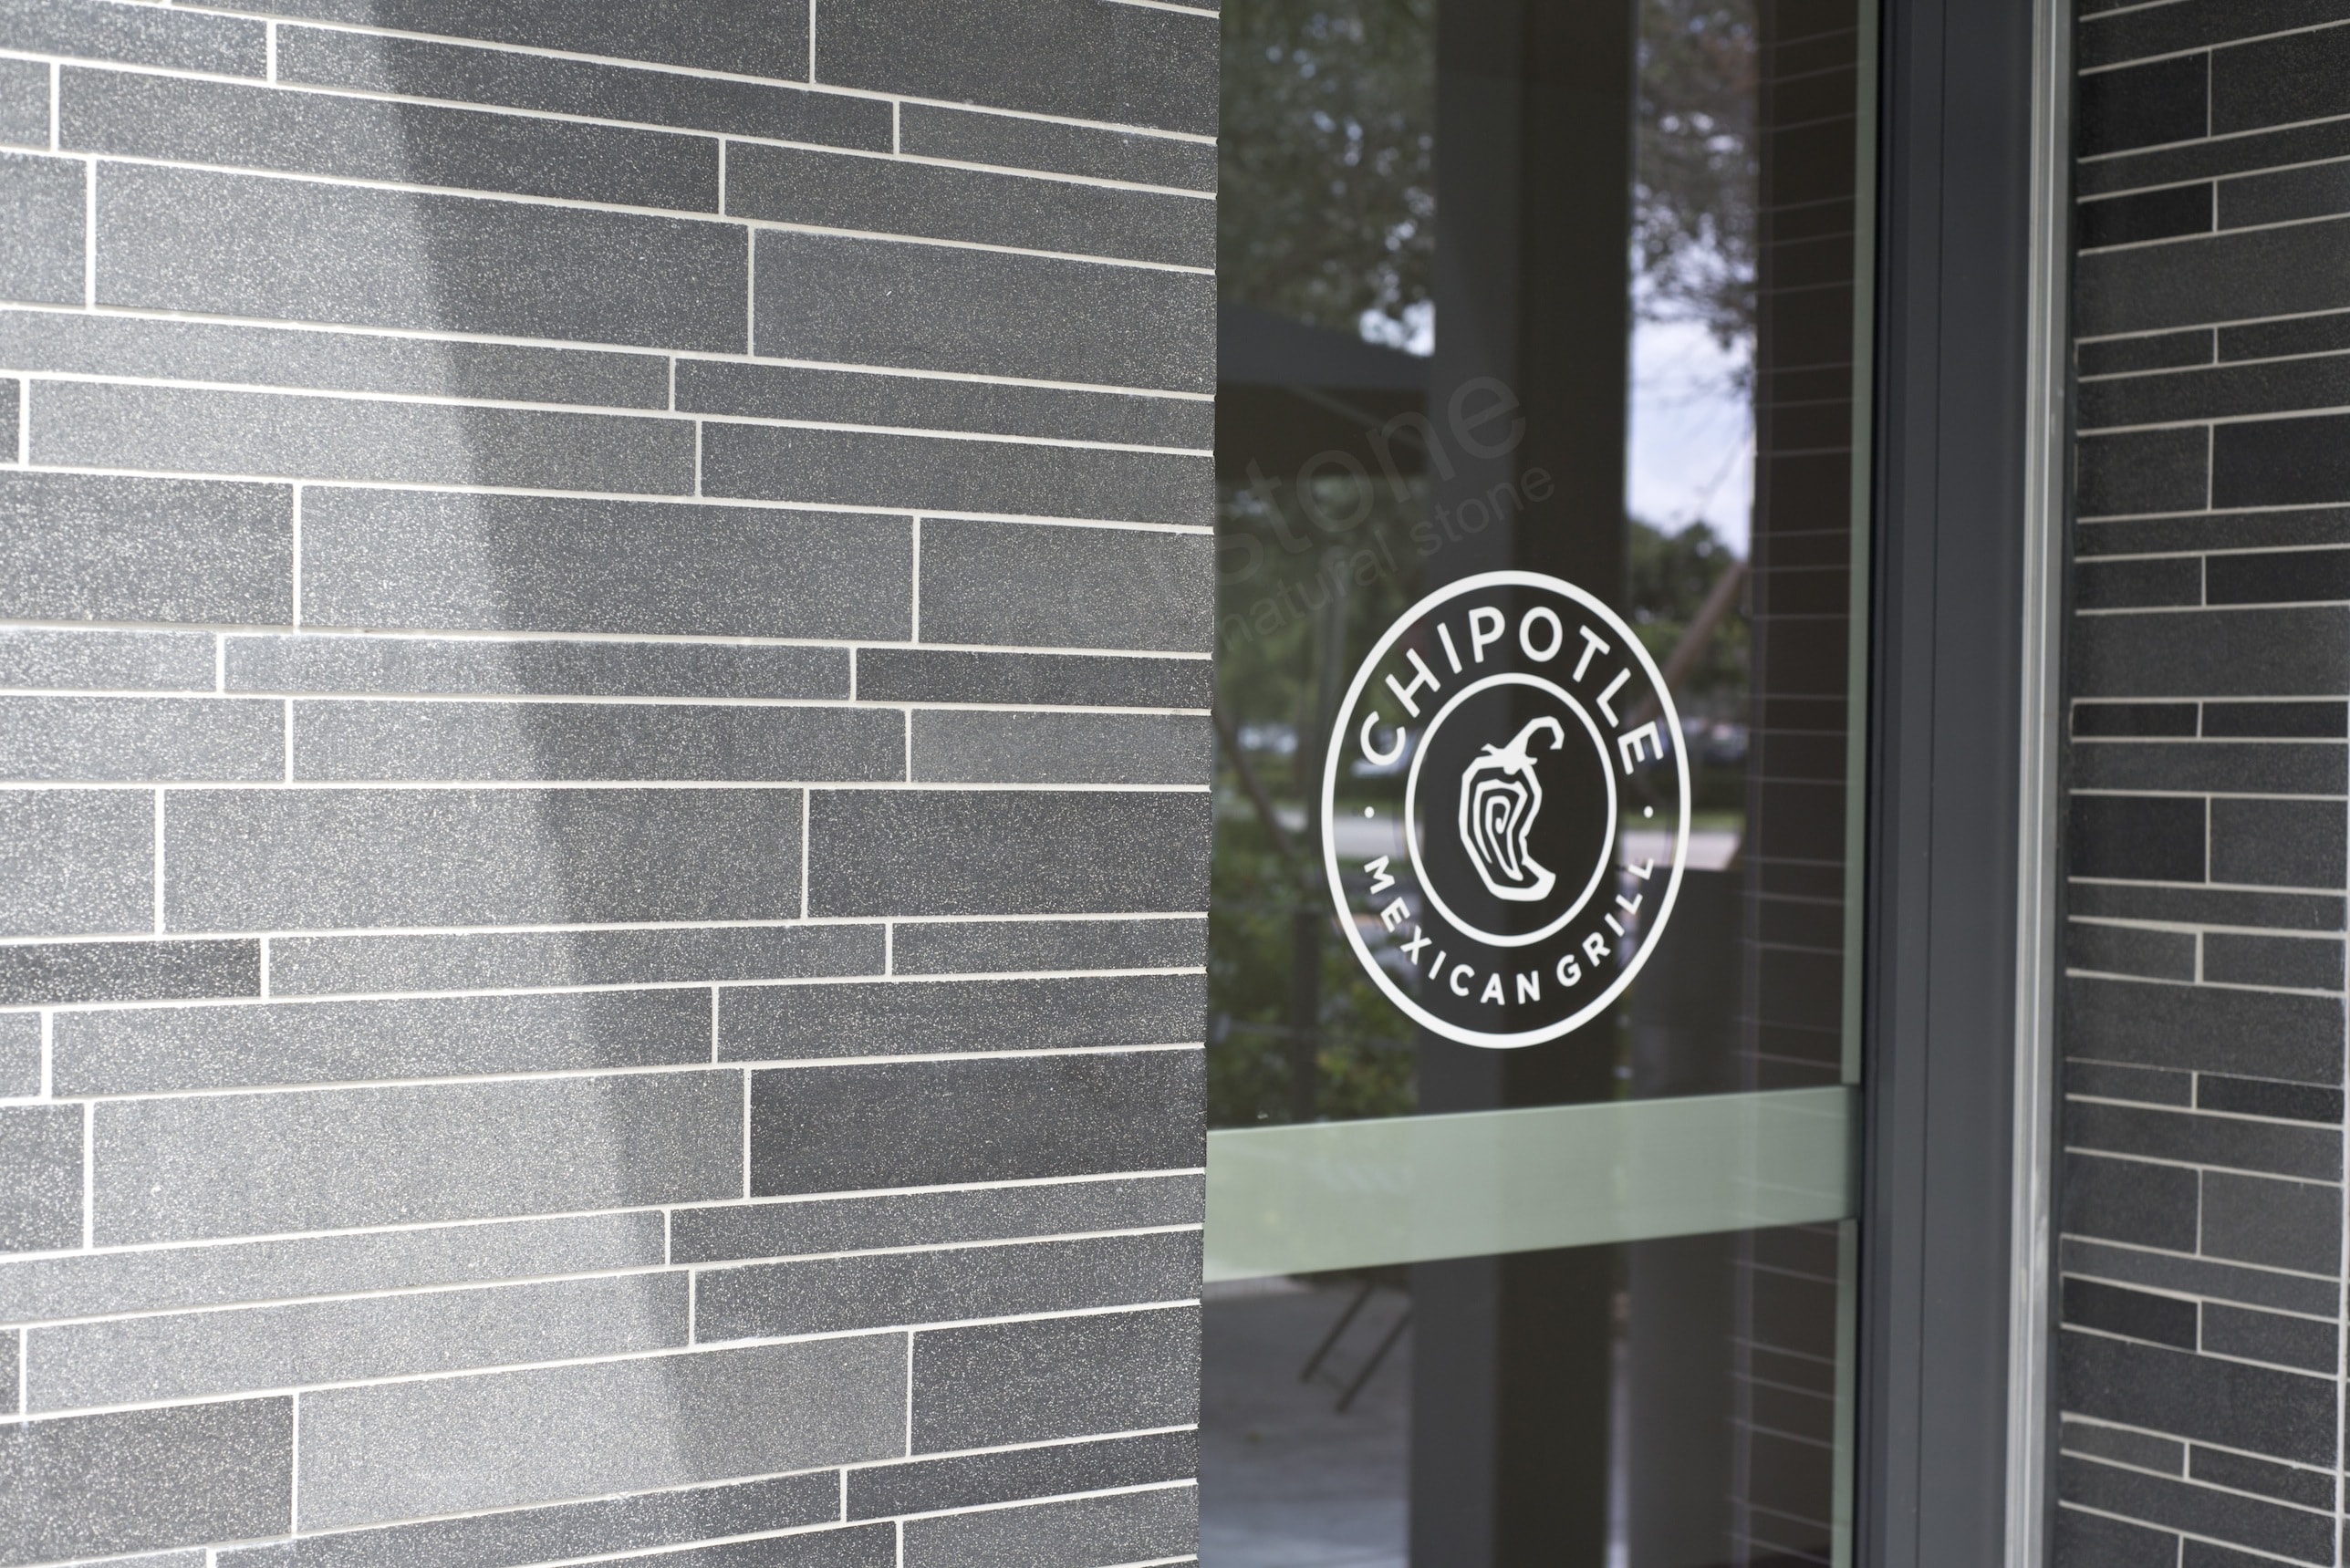 Norstone Lynia Interlocking Tiles in Grey Basalt surrounding the entrance to a Chipotle in South Florida